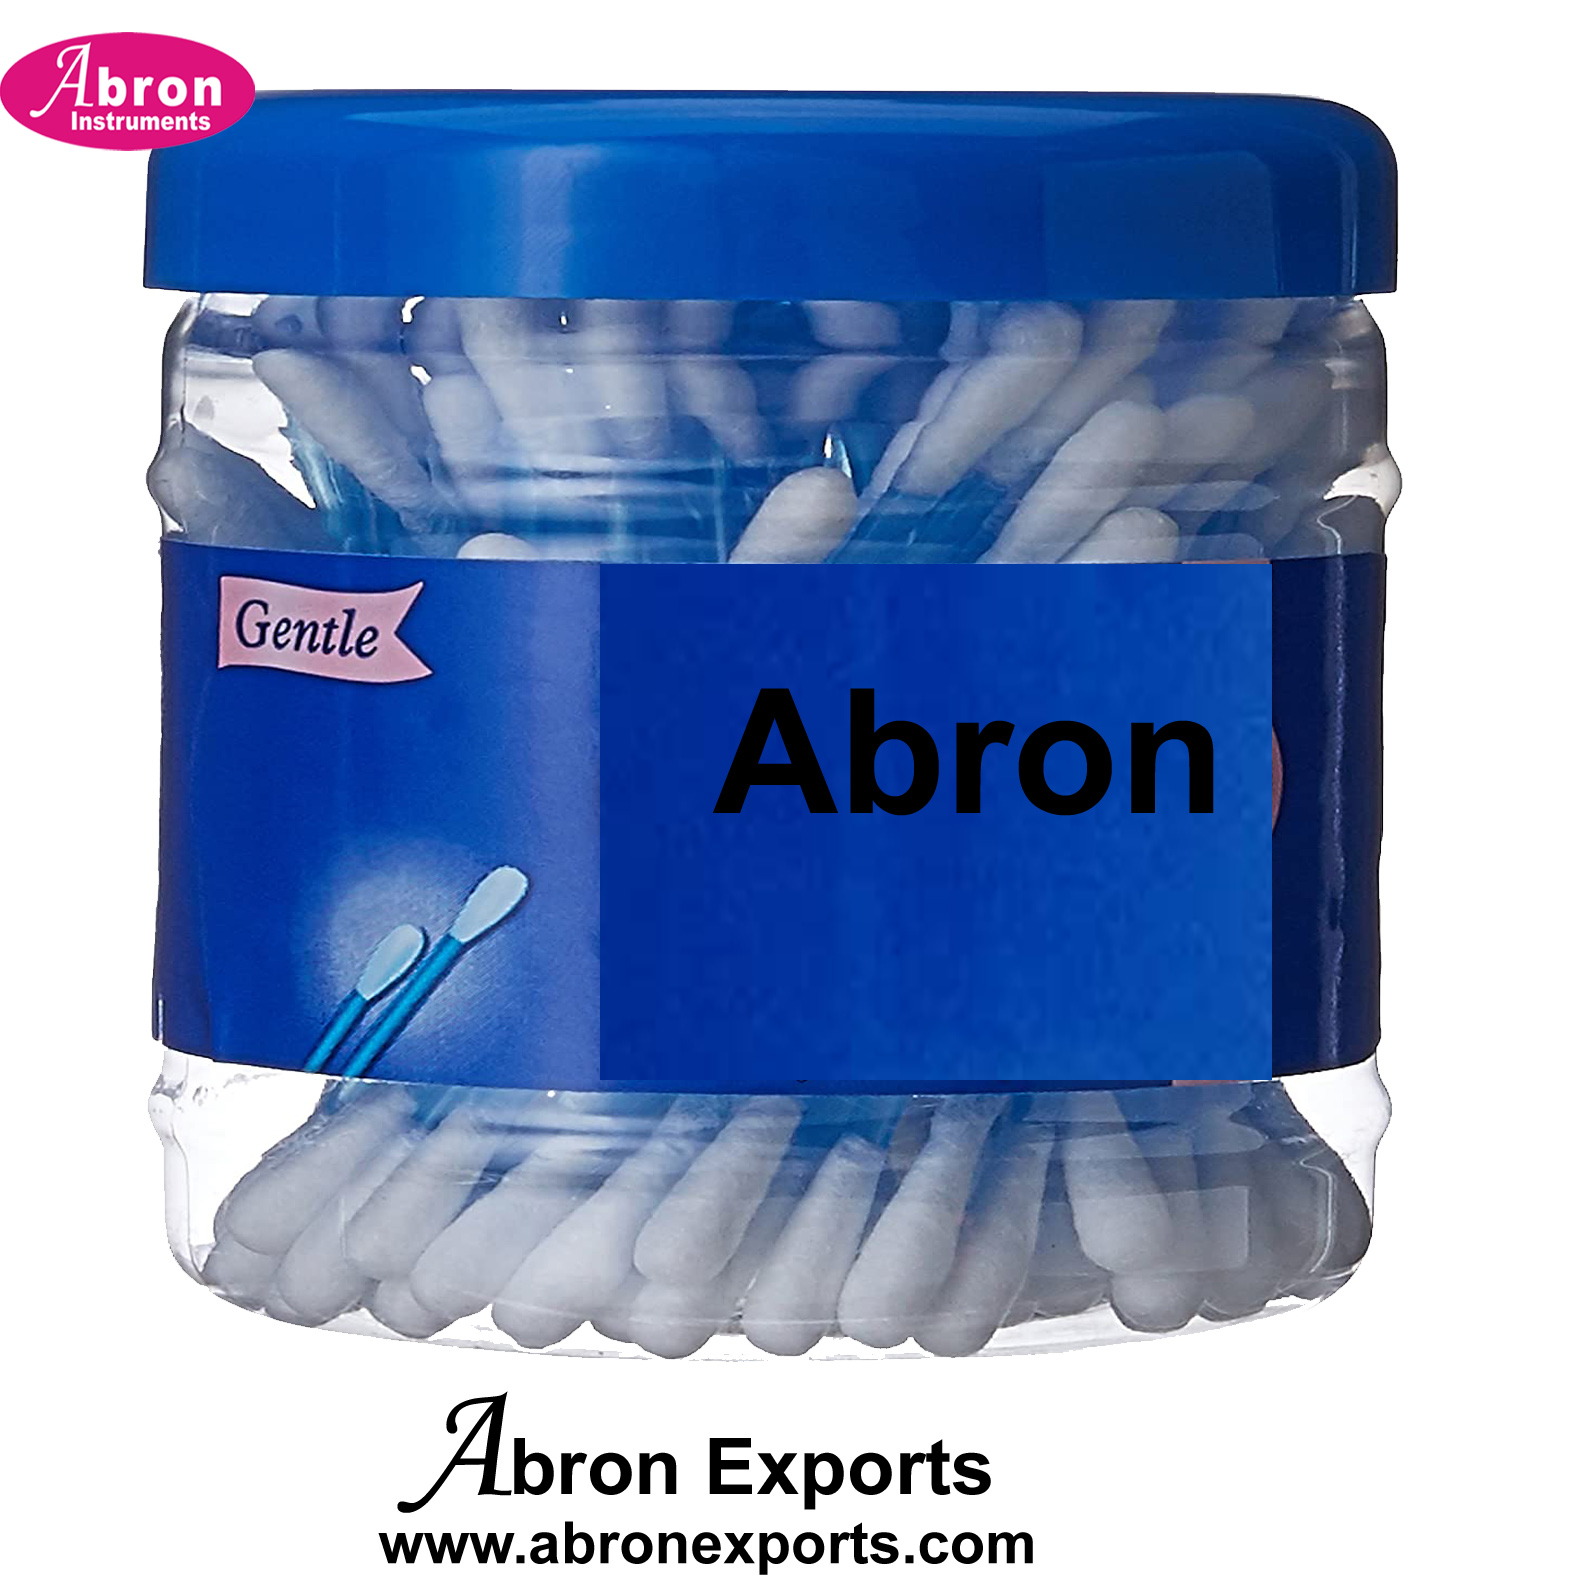 Swab ear bud sticks 200 in box non sterile for sample collectionetc pack 150 pc Abron ABM-79EB2